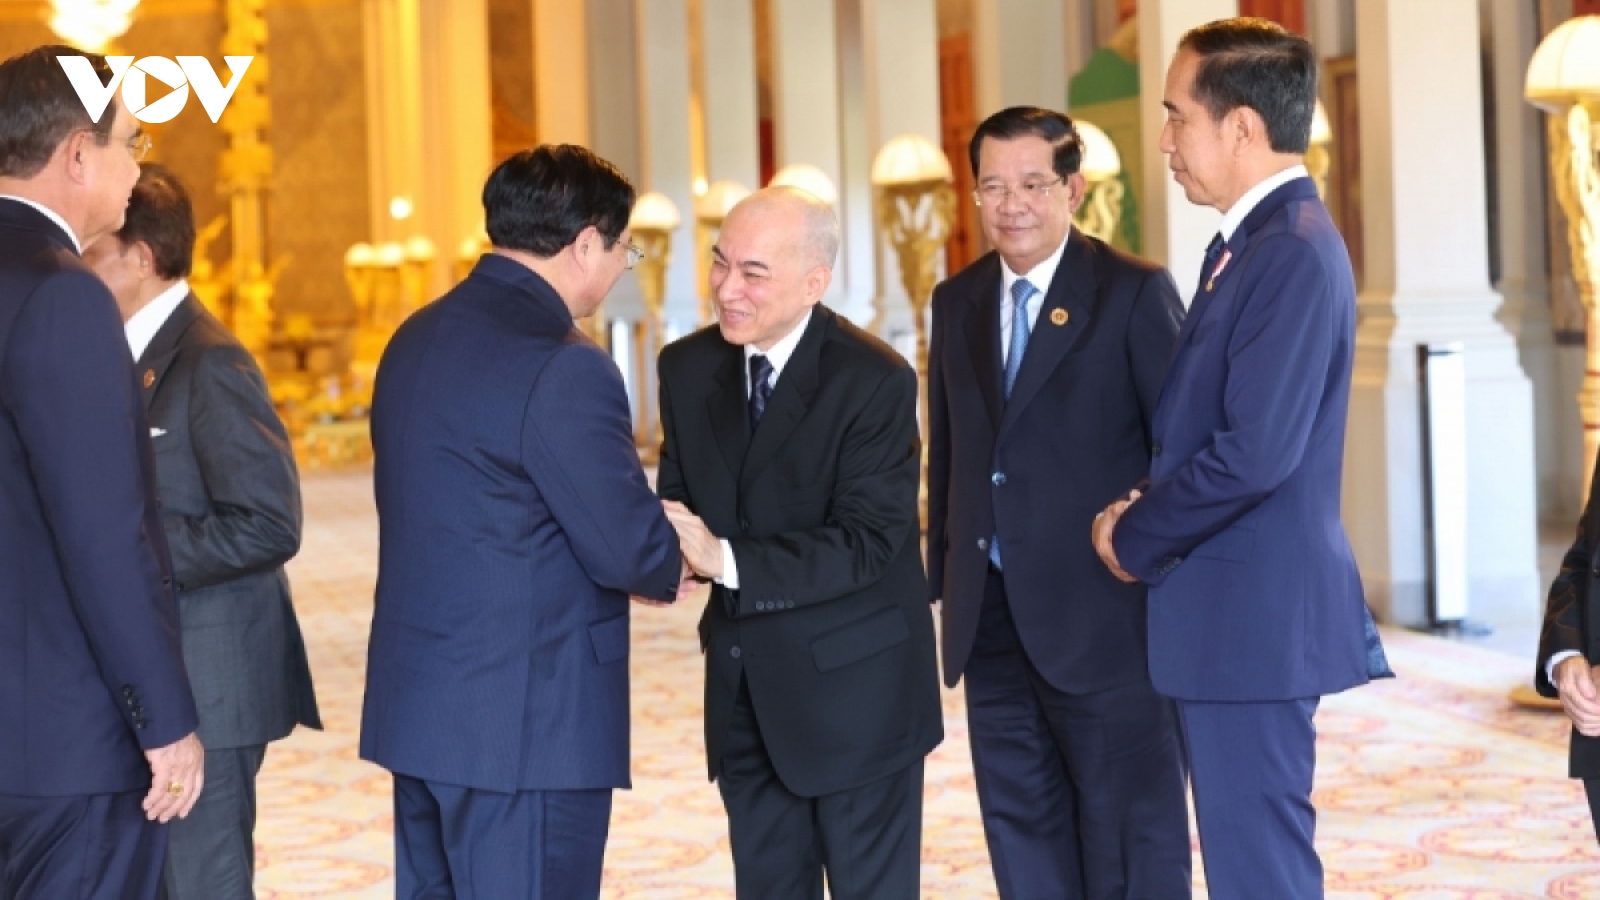 ASEAN leaders pay courtesy visit to Cambodian King ahead of regional summits